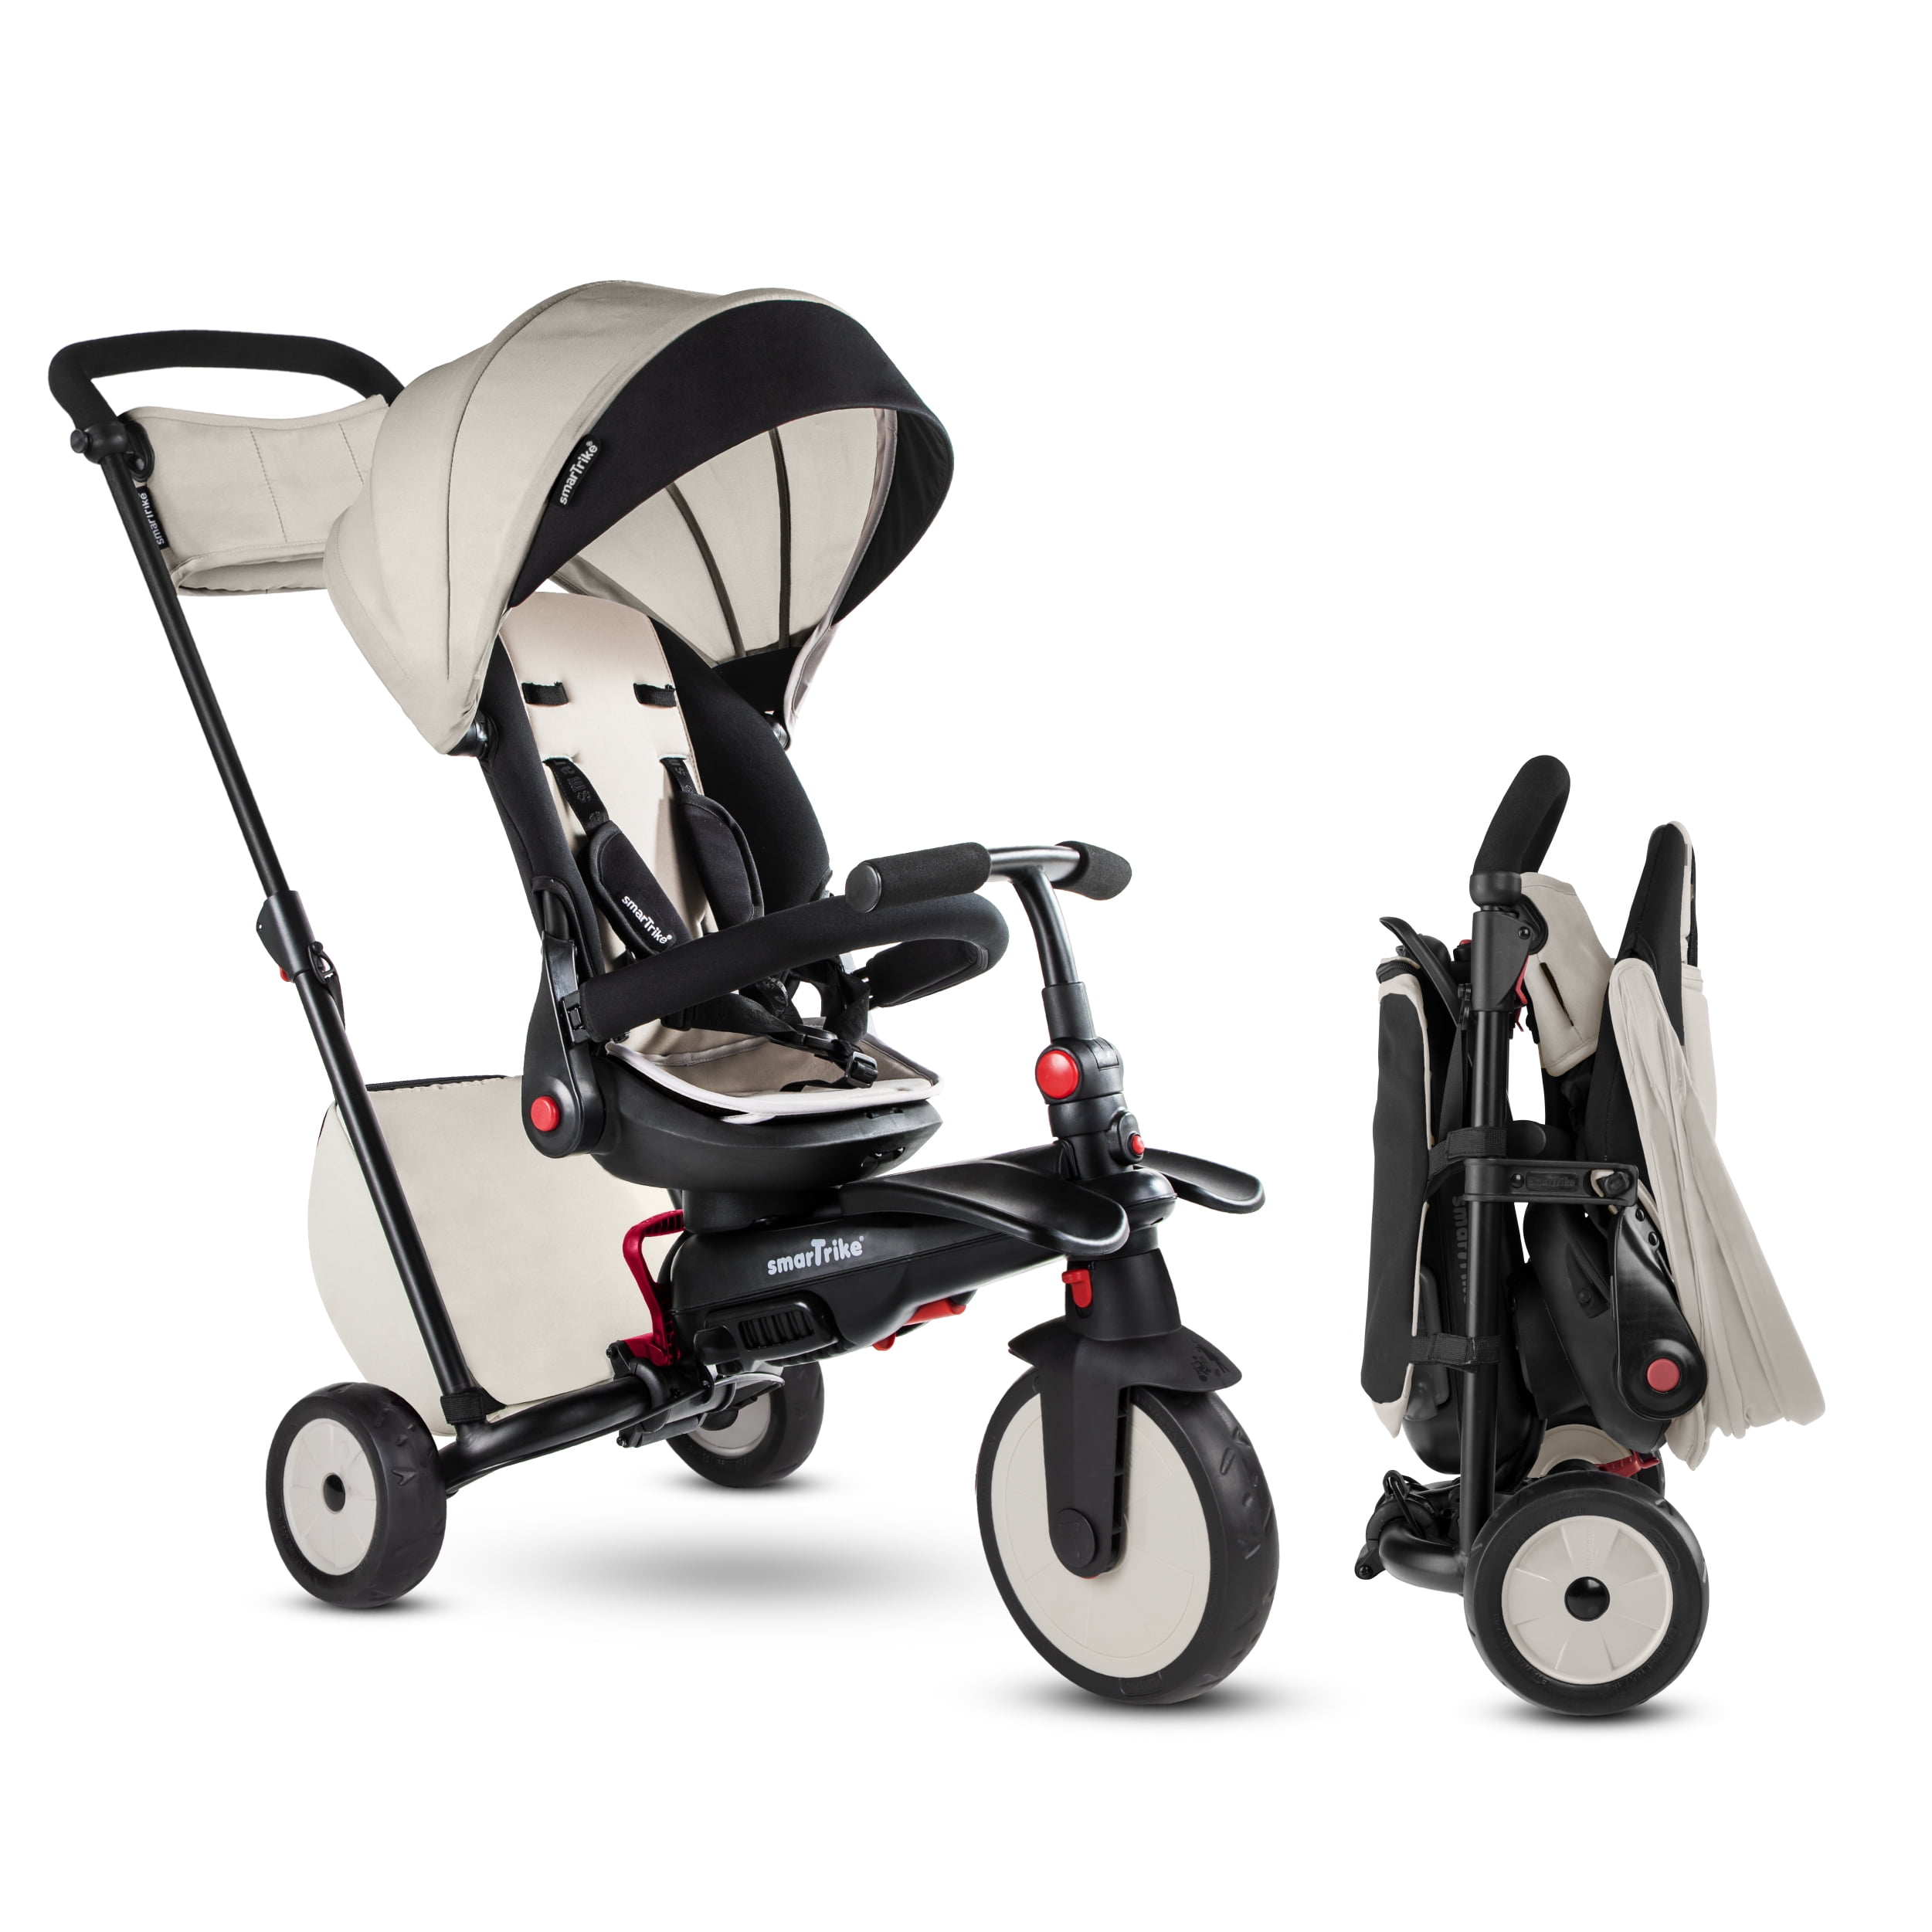 Details about   SmarTrike STR7 Vibe 7 in 1 Compact Folding Lightweight Baby Stroller Trike Grey 